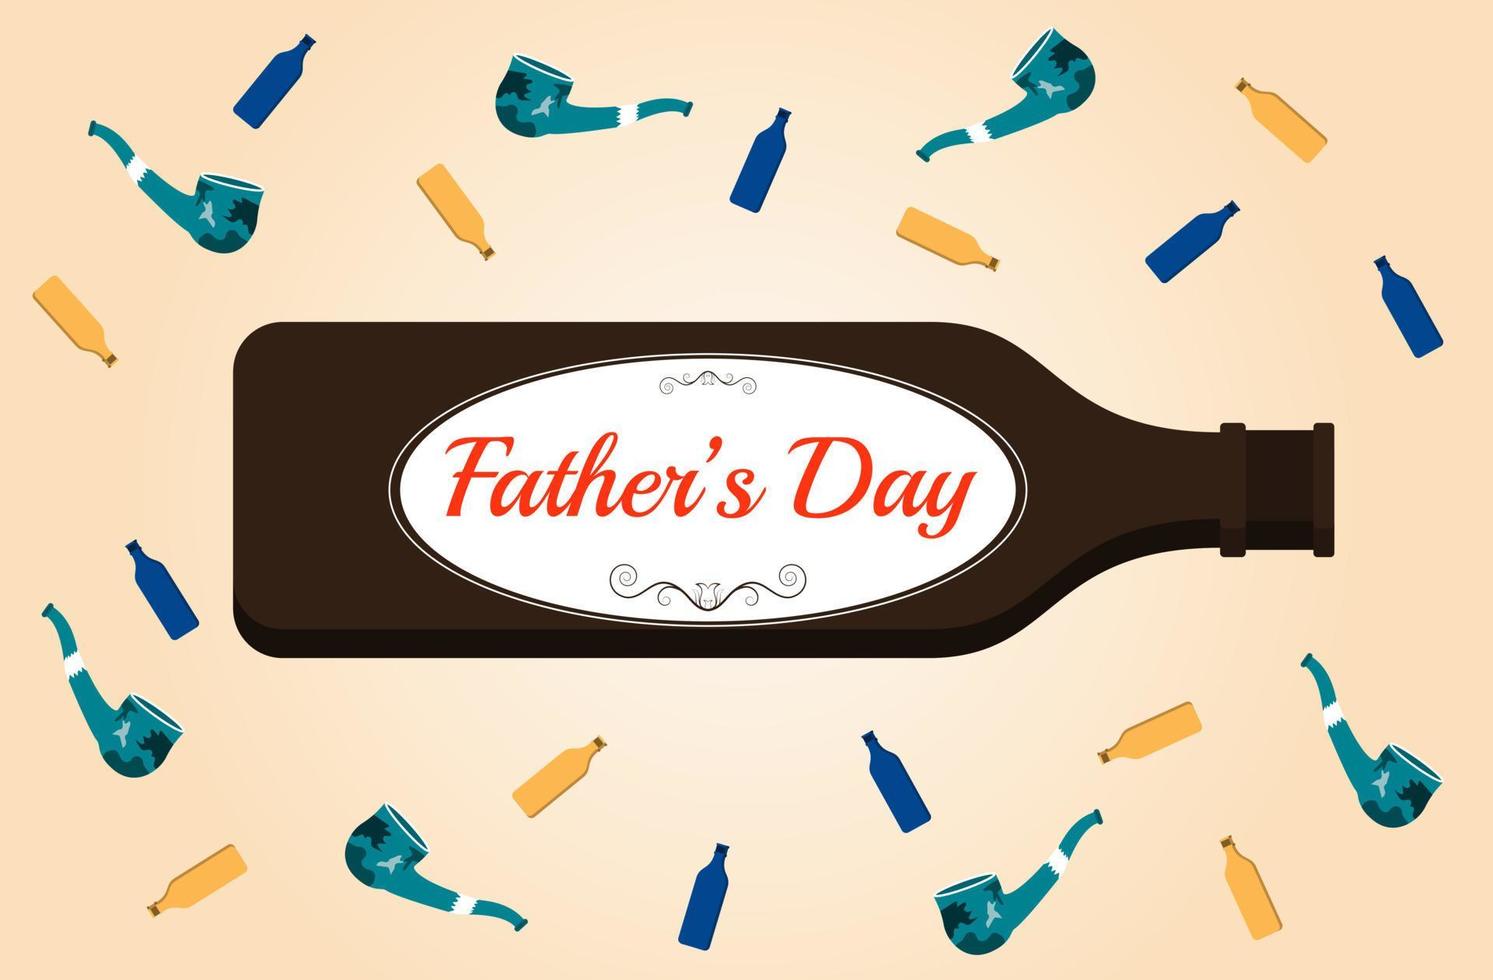 Father's Day letters on a beer bottle and surrounded by pipes and small glass. The design expresses masculinity. vector